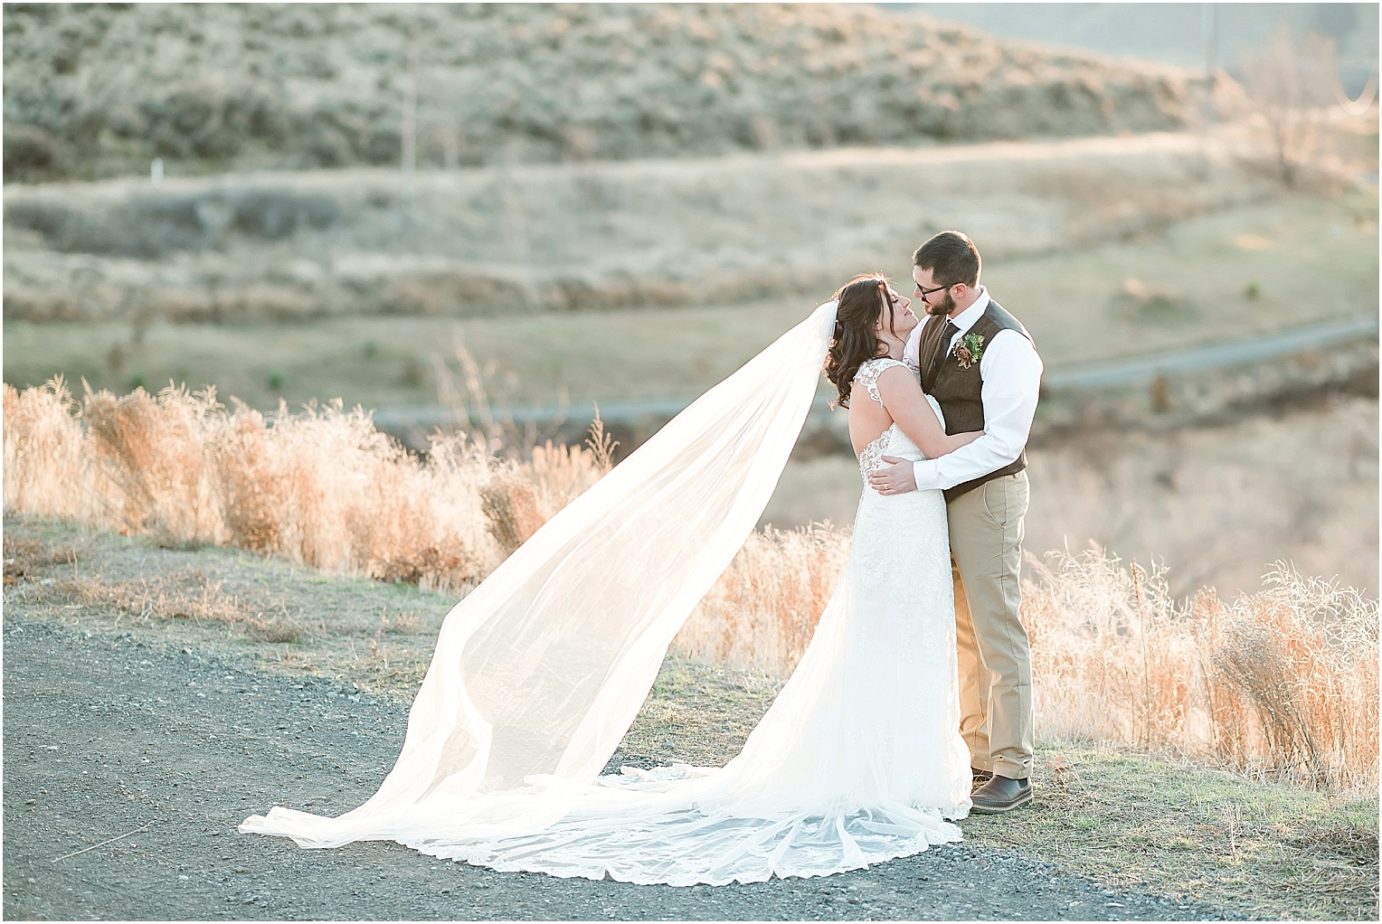 Fontaine Estate Winery Wedding just married sunset portraits by naches wedding photographer